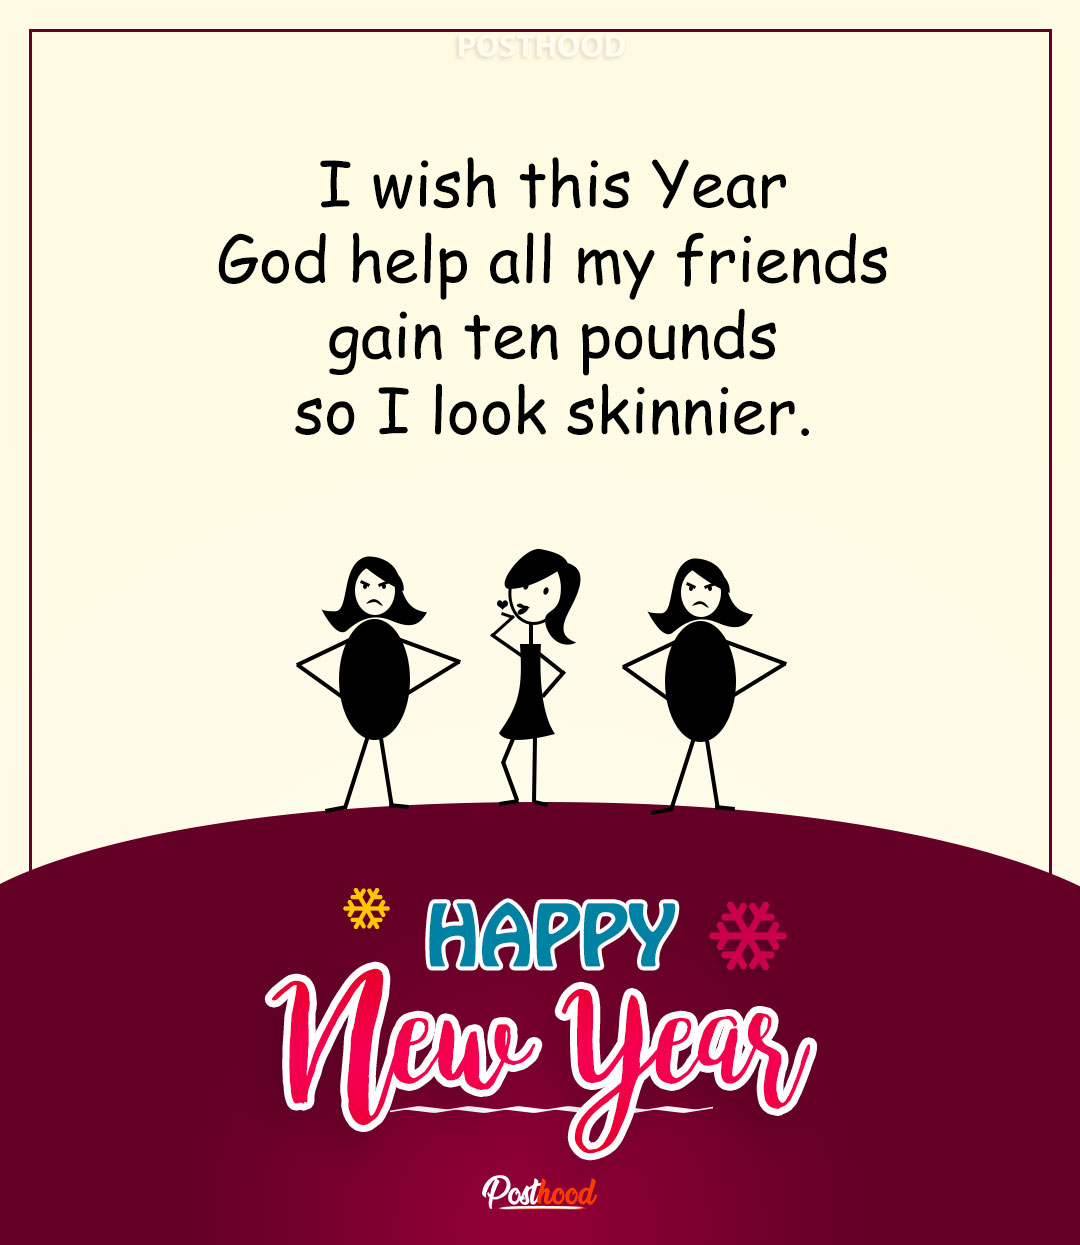 Funny New Year wishes to your best friends trying to lose weight. Super funny New Year messages to wish them gain some more pounds. 